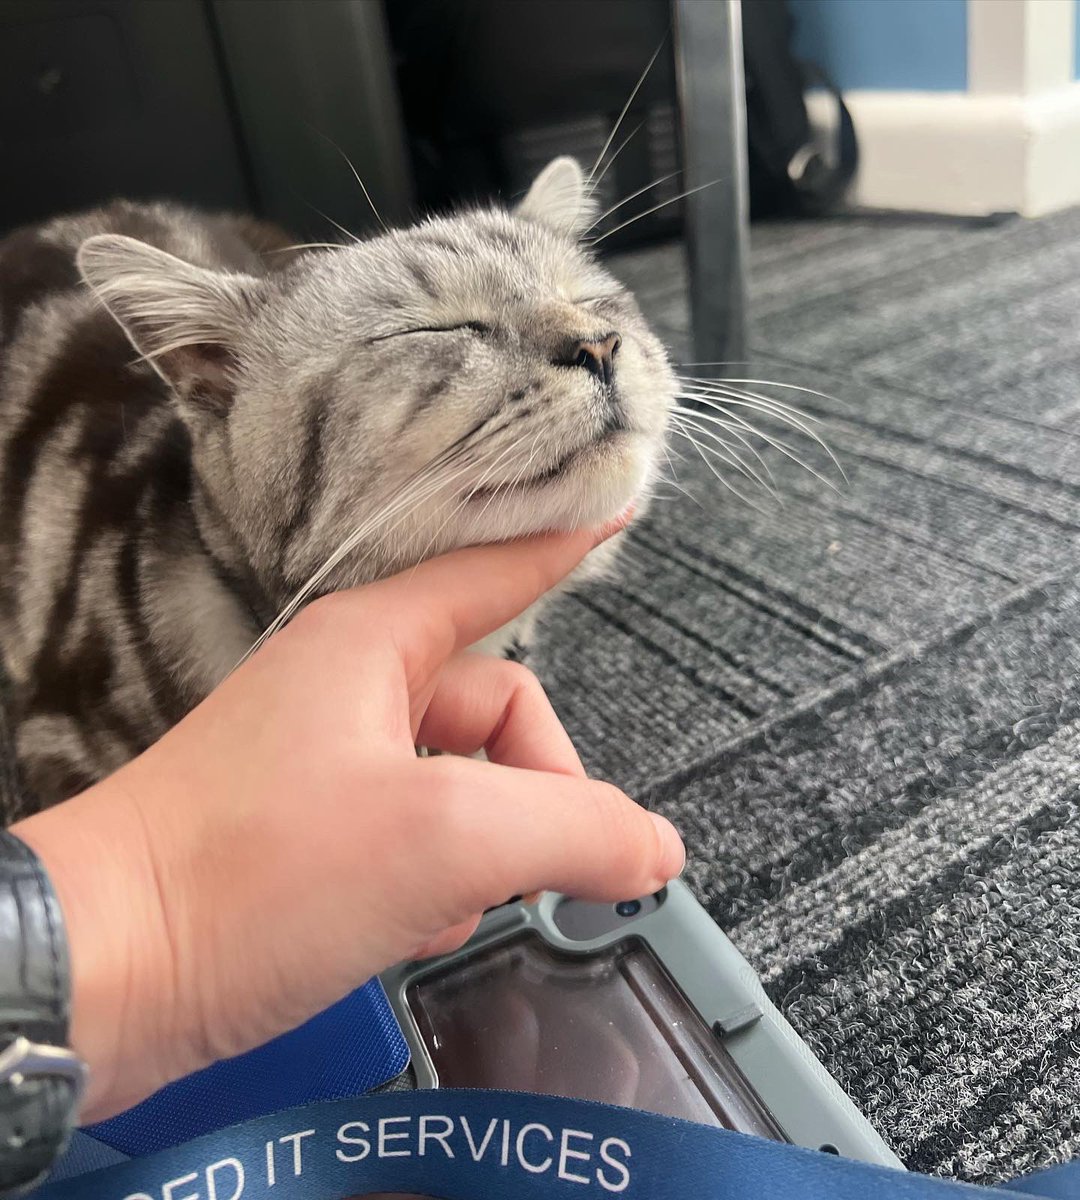 We’ve had a rather unexpected helper on todays migration to @jamfsoftware at @TransformTrust @Rosslyn_Park 😍❤️

Meet Monty. He’s a neighbour of the school, and comes to visit the office everyday when his owner goes to work.